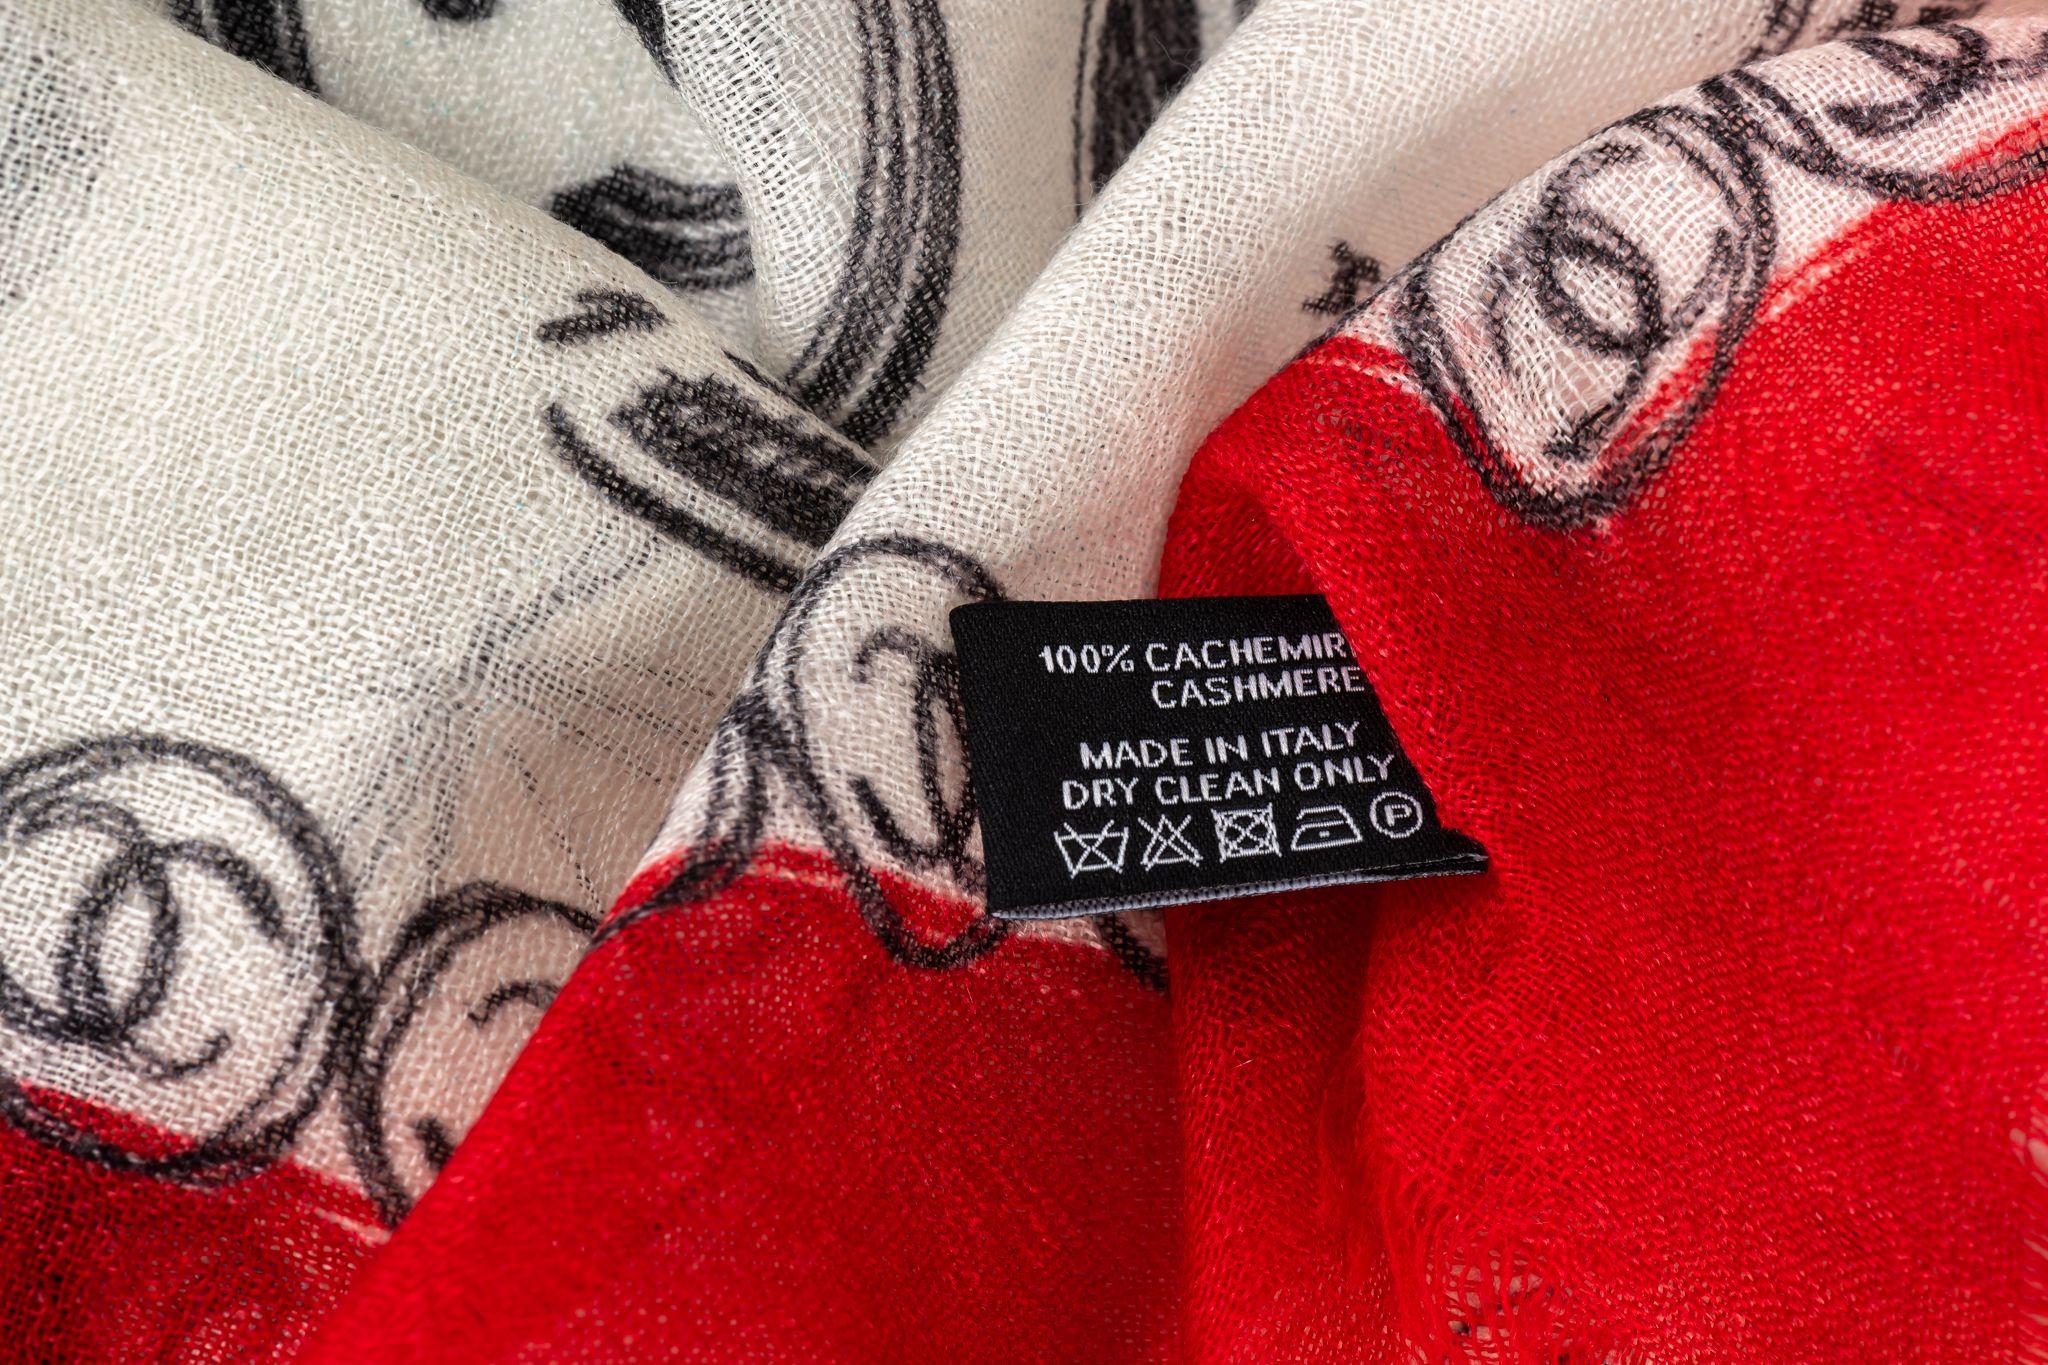 Chanel new cashmere shawl in white with red trim. Black logo drawings. Care tag attached.